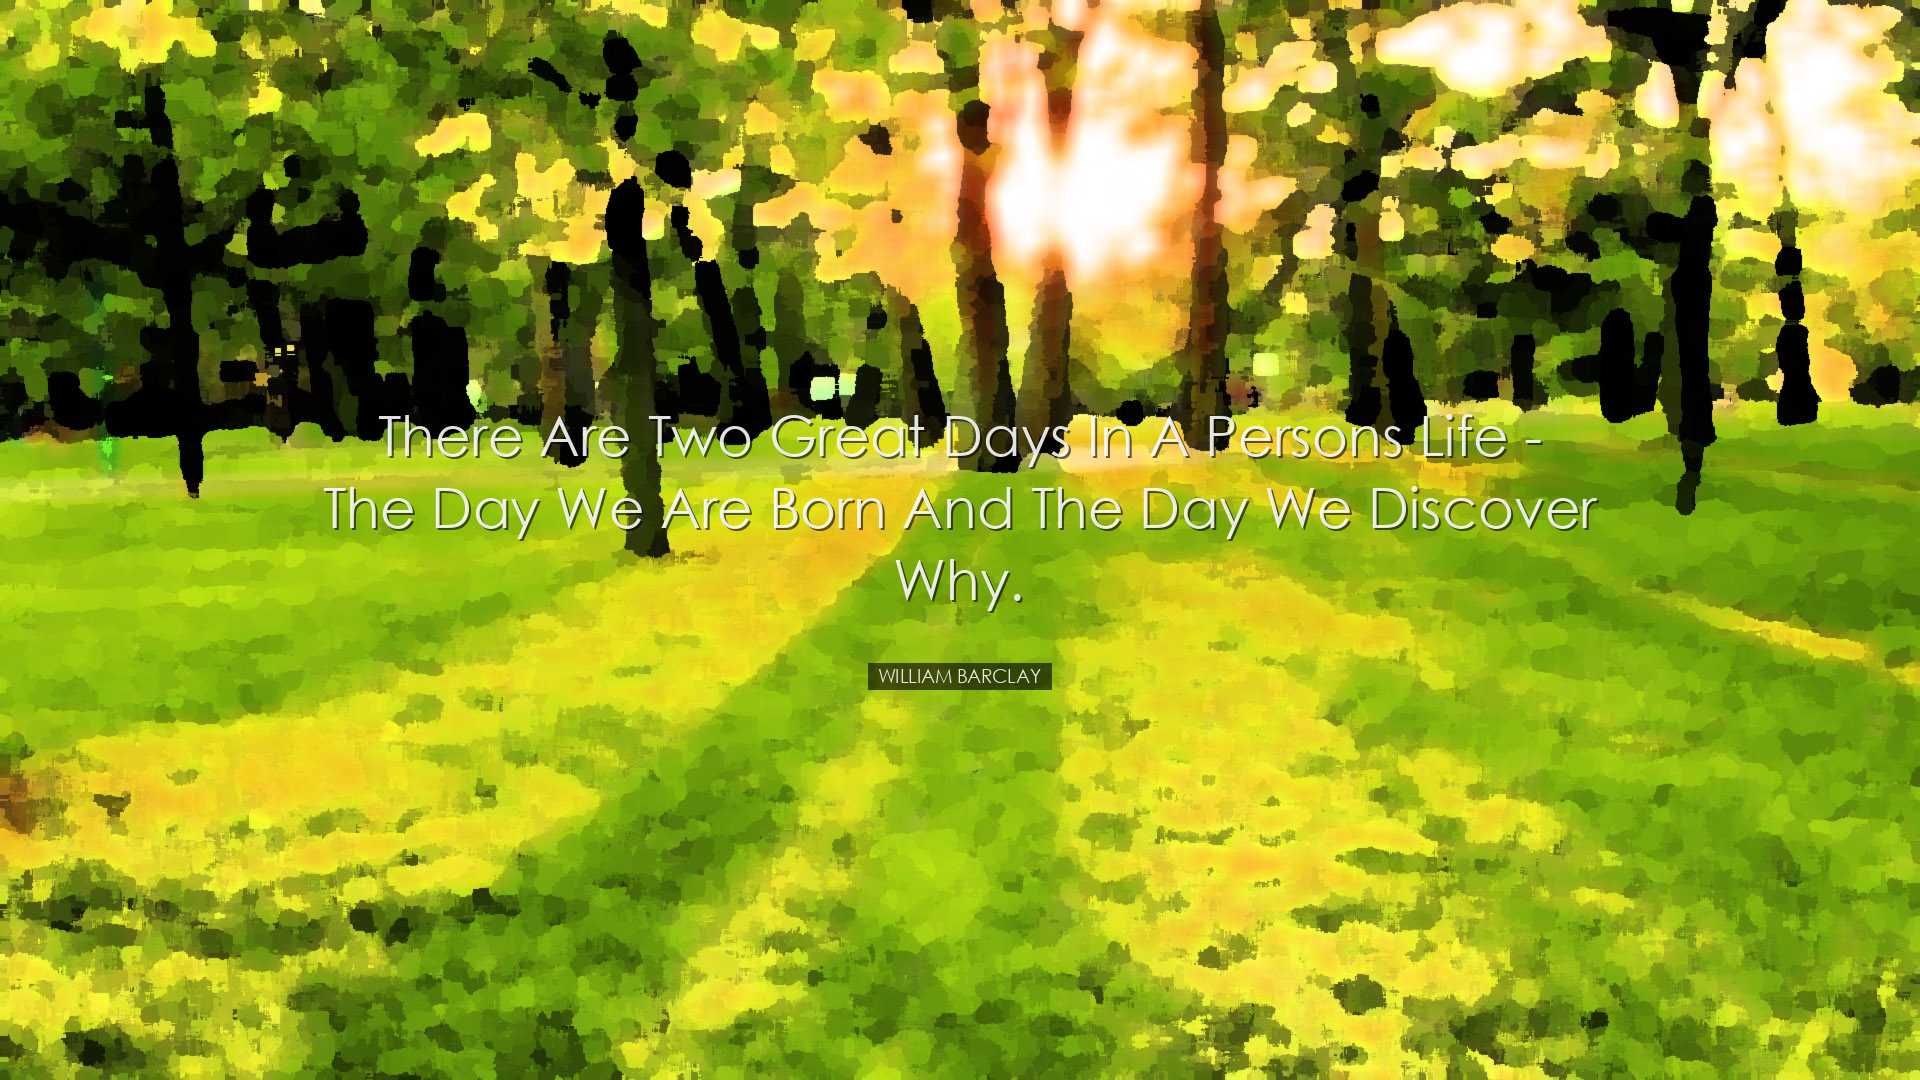 There are two great days in a persons life - the day we are born a